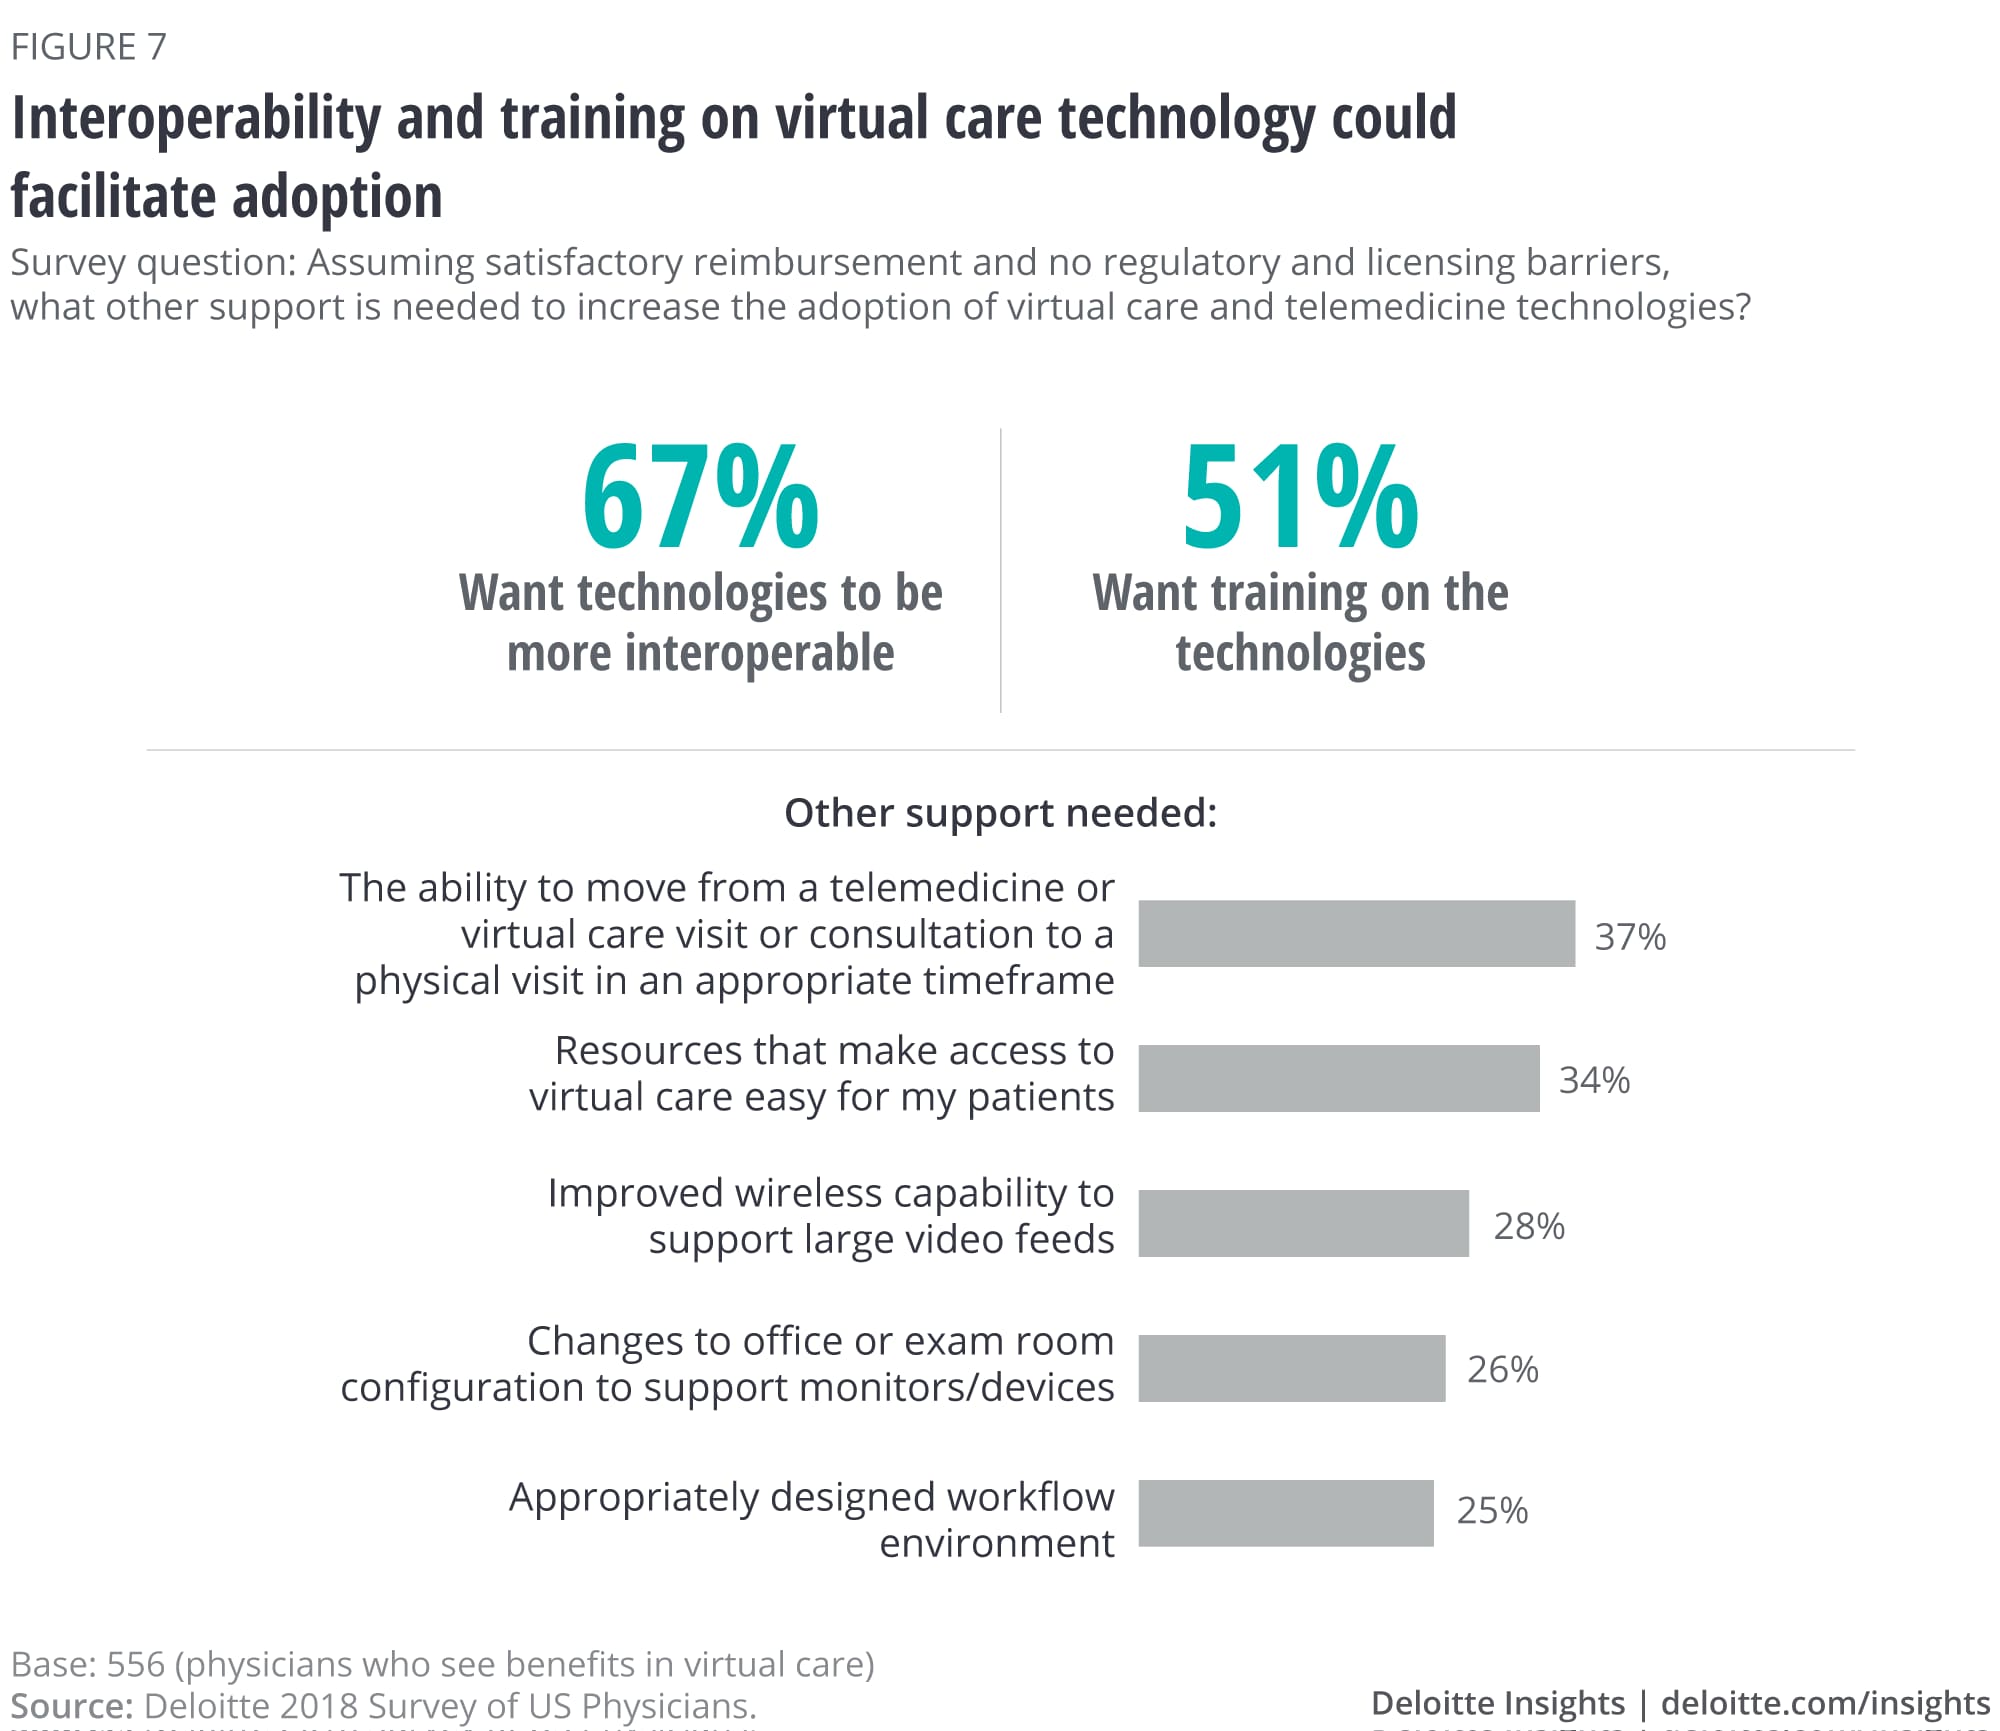 Interoperability and training on virtual care technology could facilitate adoption